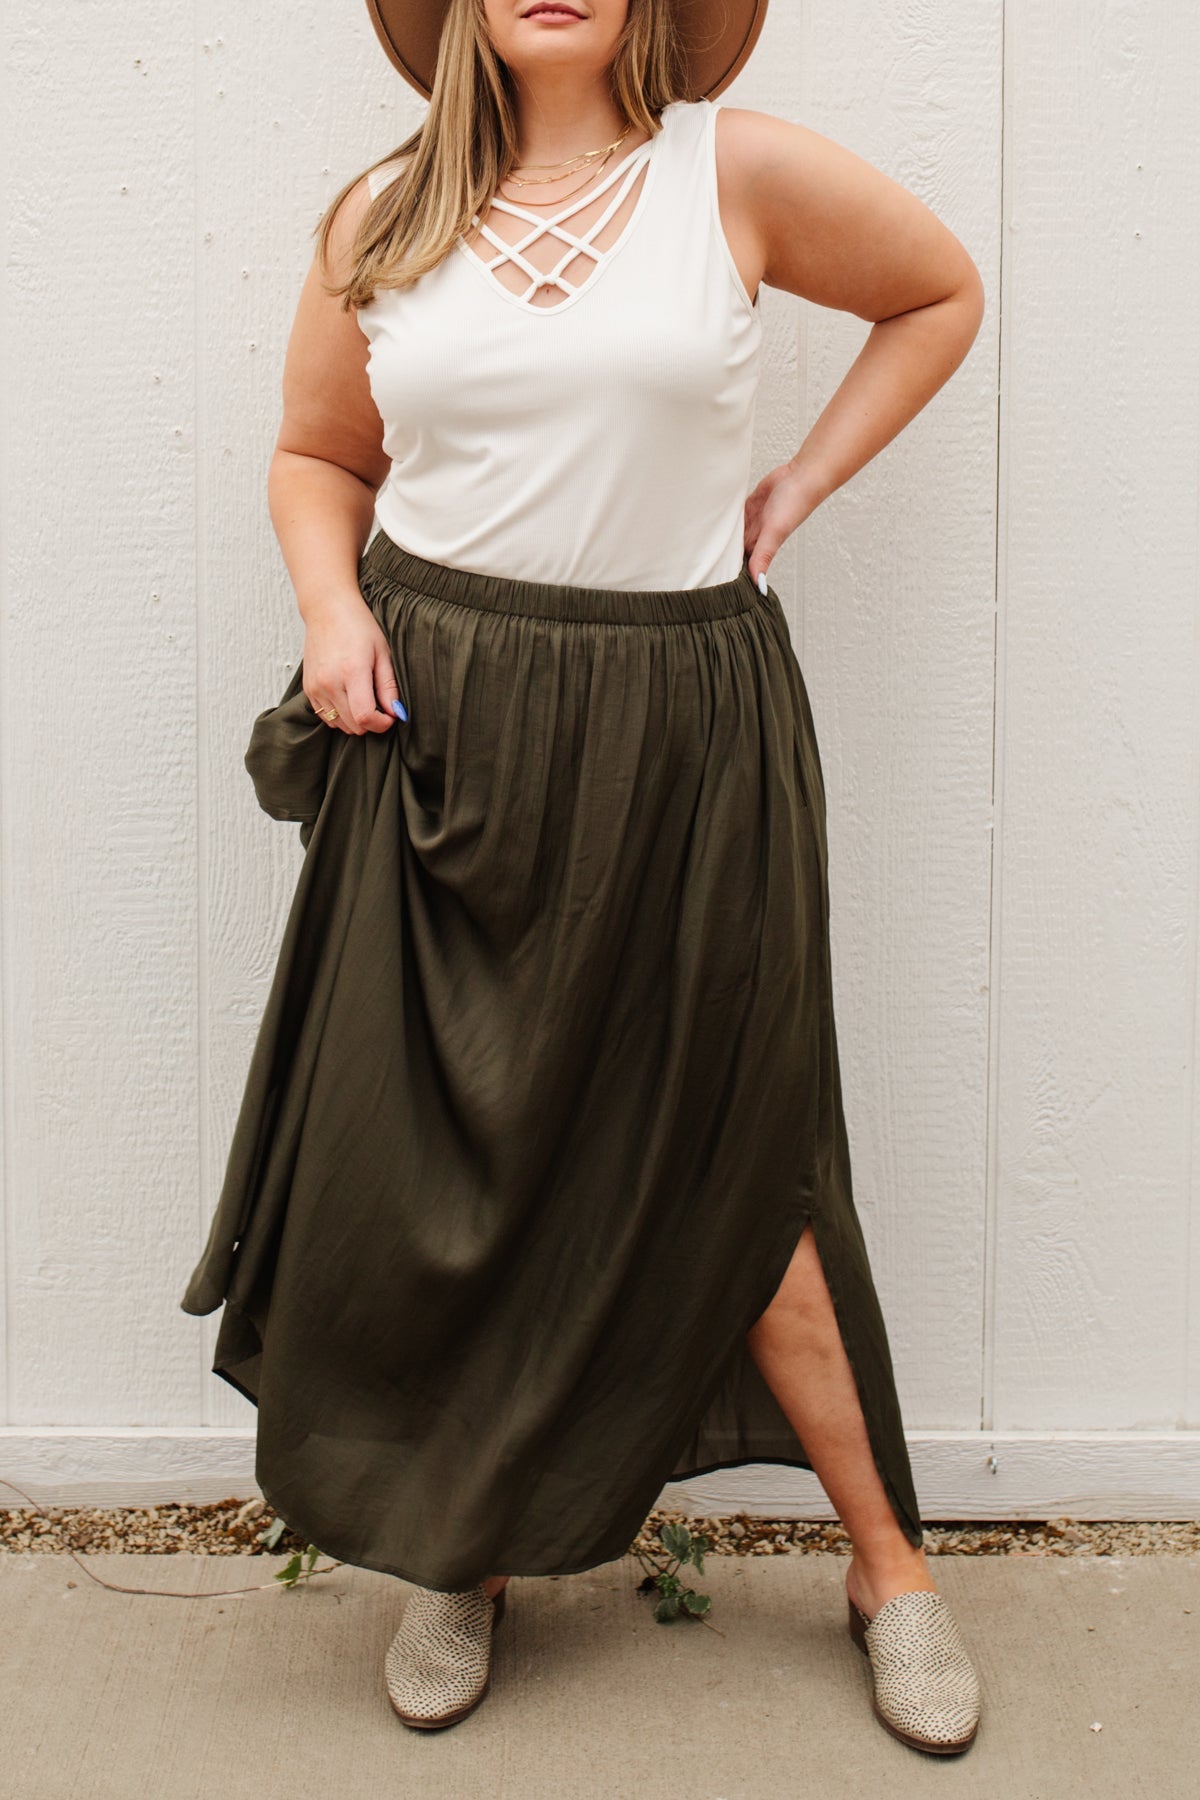 Get Away Maxi Skirt in Olive-Womens-Graceful & Chic Boutique, Family Clothing Store in Waxahachie, Texas